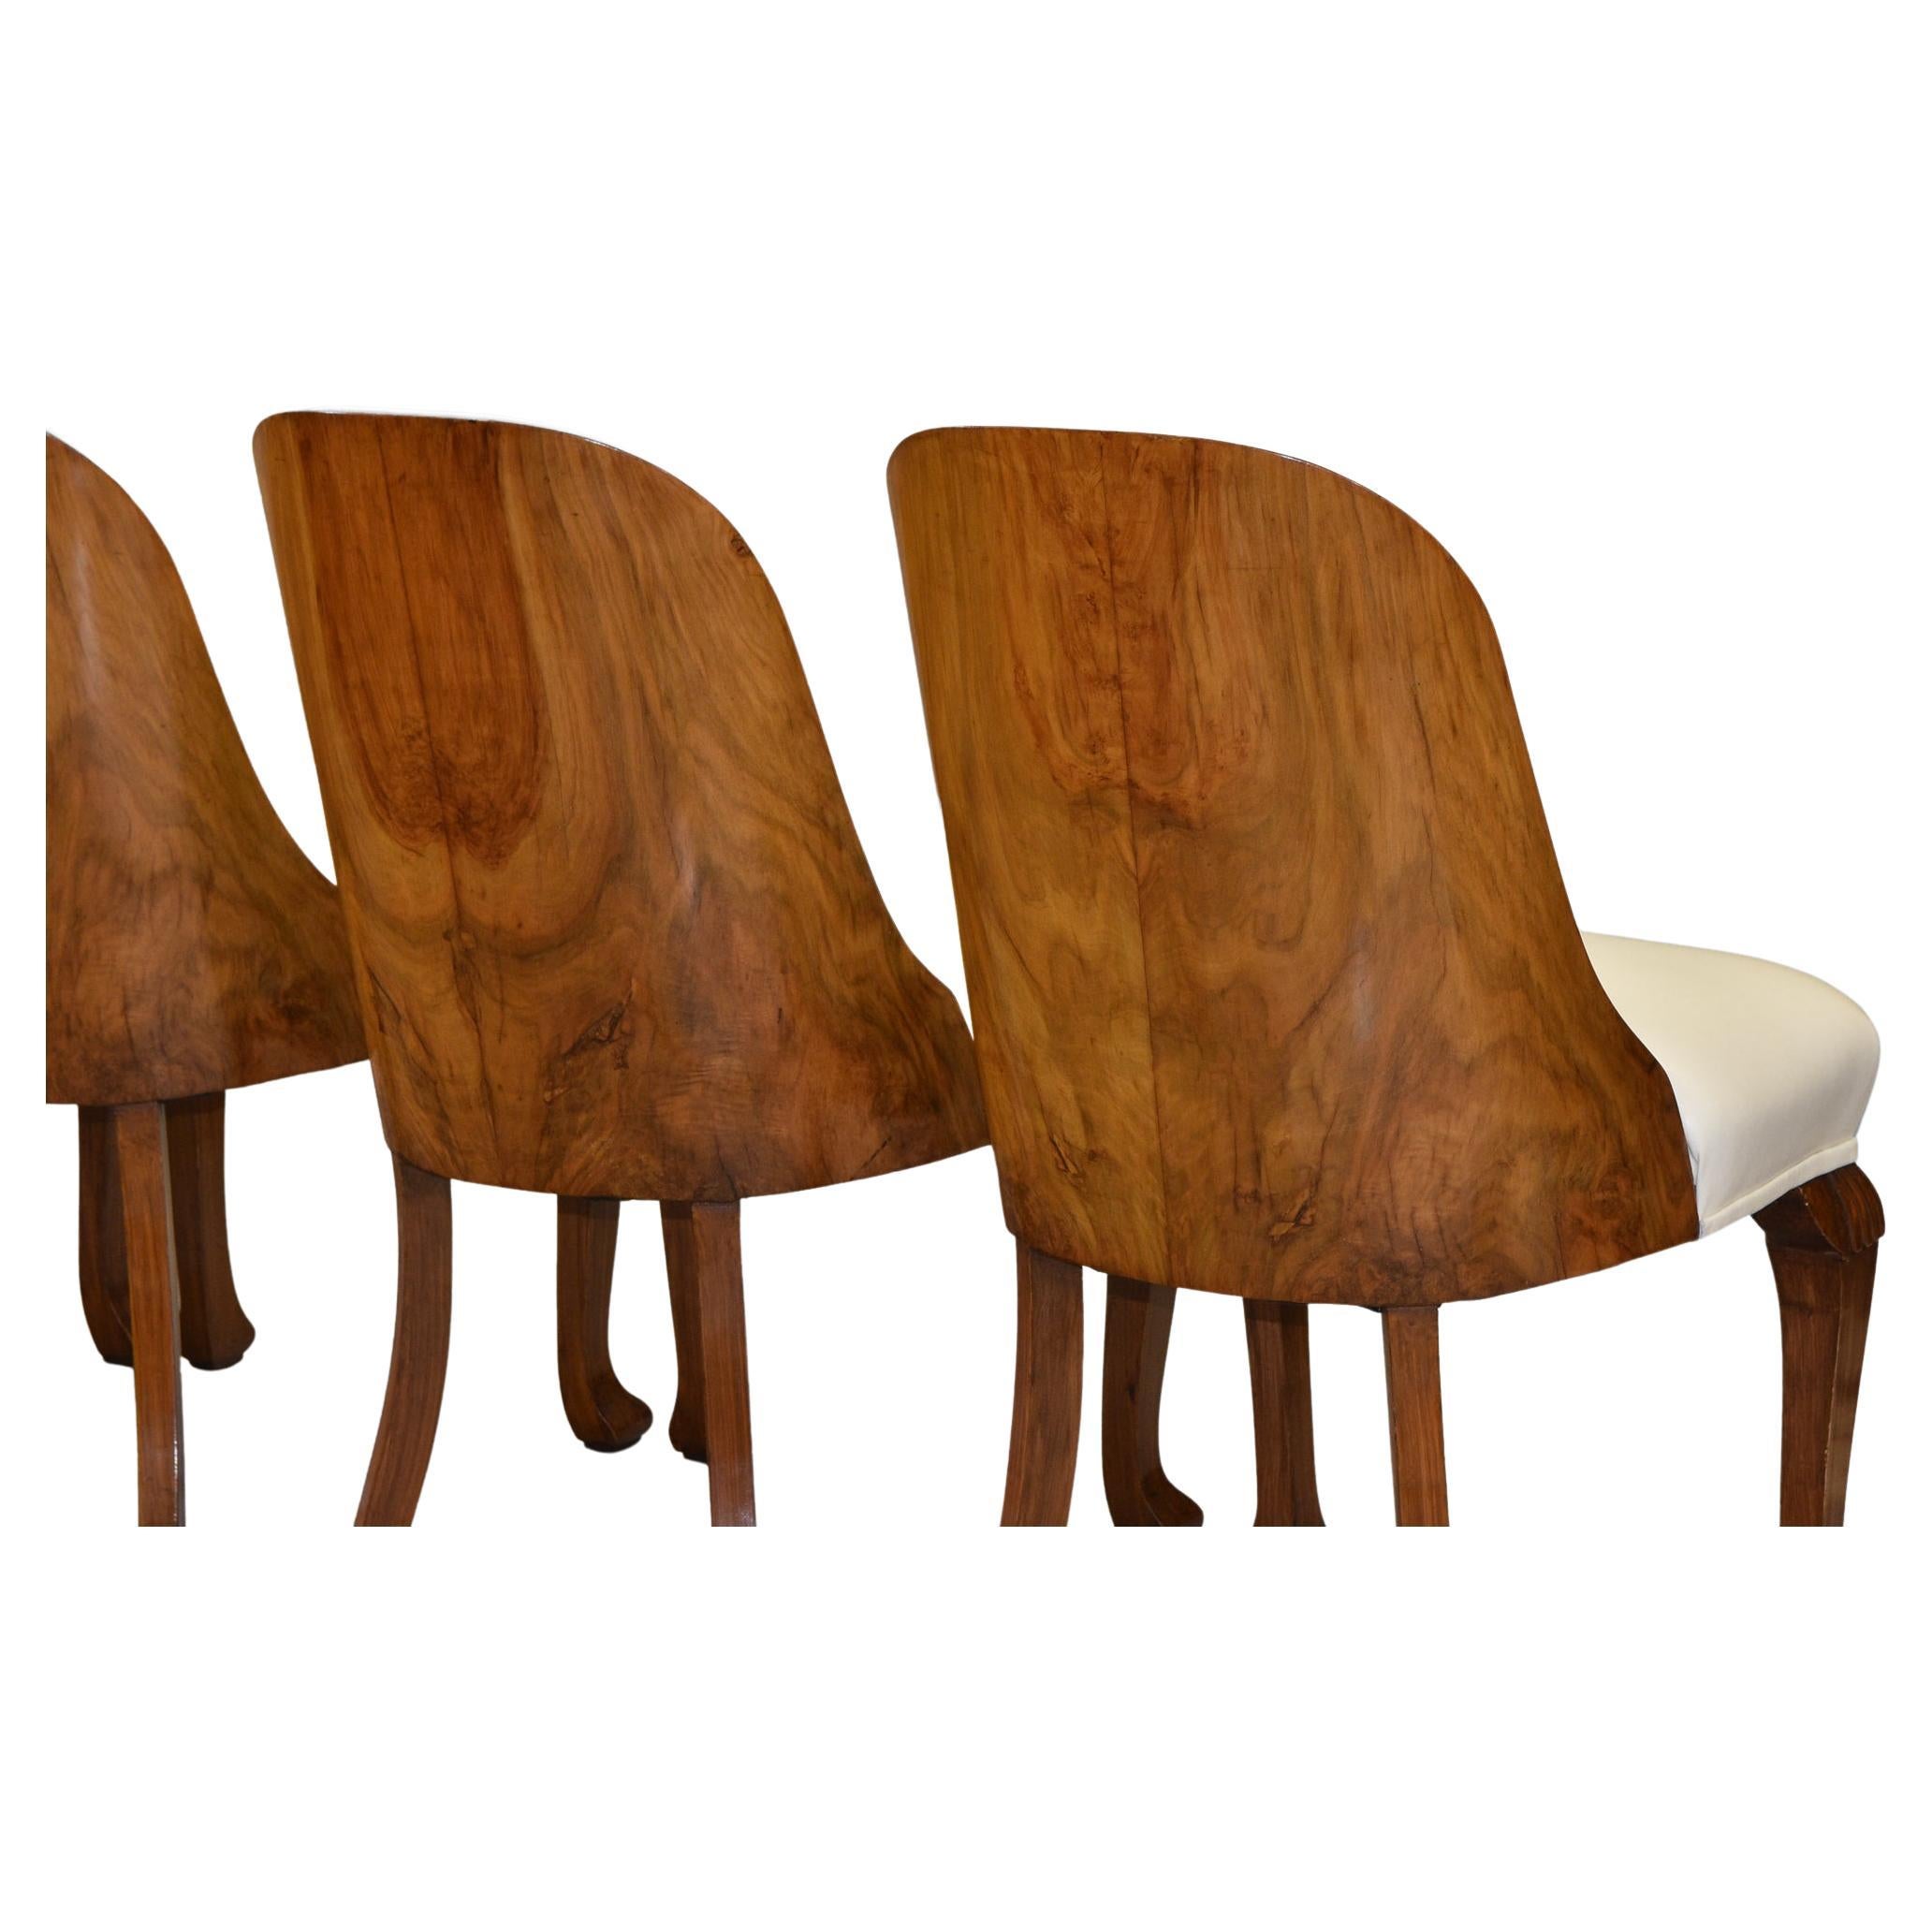 A superb set of four Art Deco walnut shaped-back dining chairs with leather seating. Circa 1930's.

The walnut frames have been cleaned and are in very good condition, showing some light signs of use with age. The backs showing wonderful bookmatch